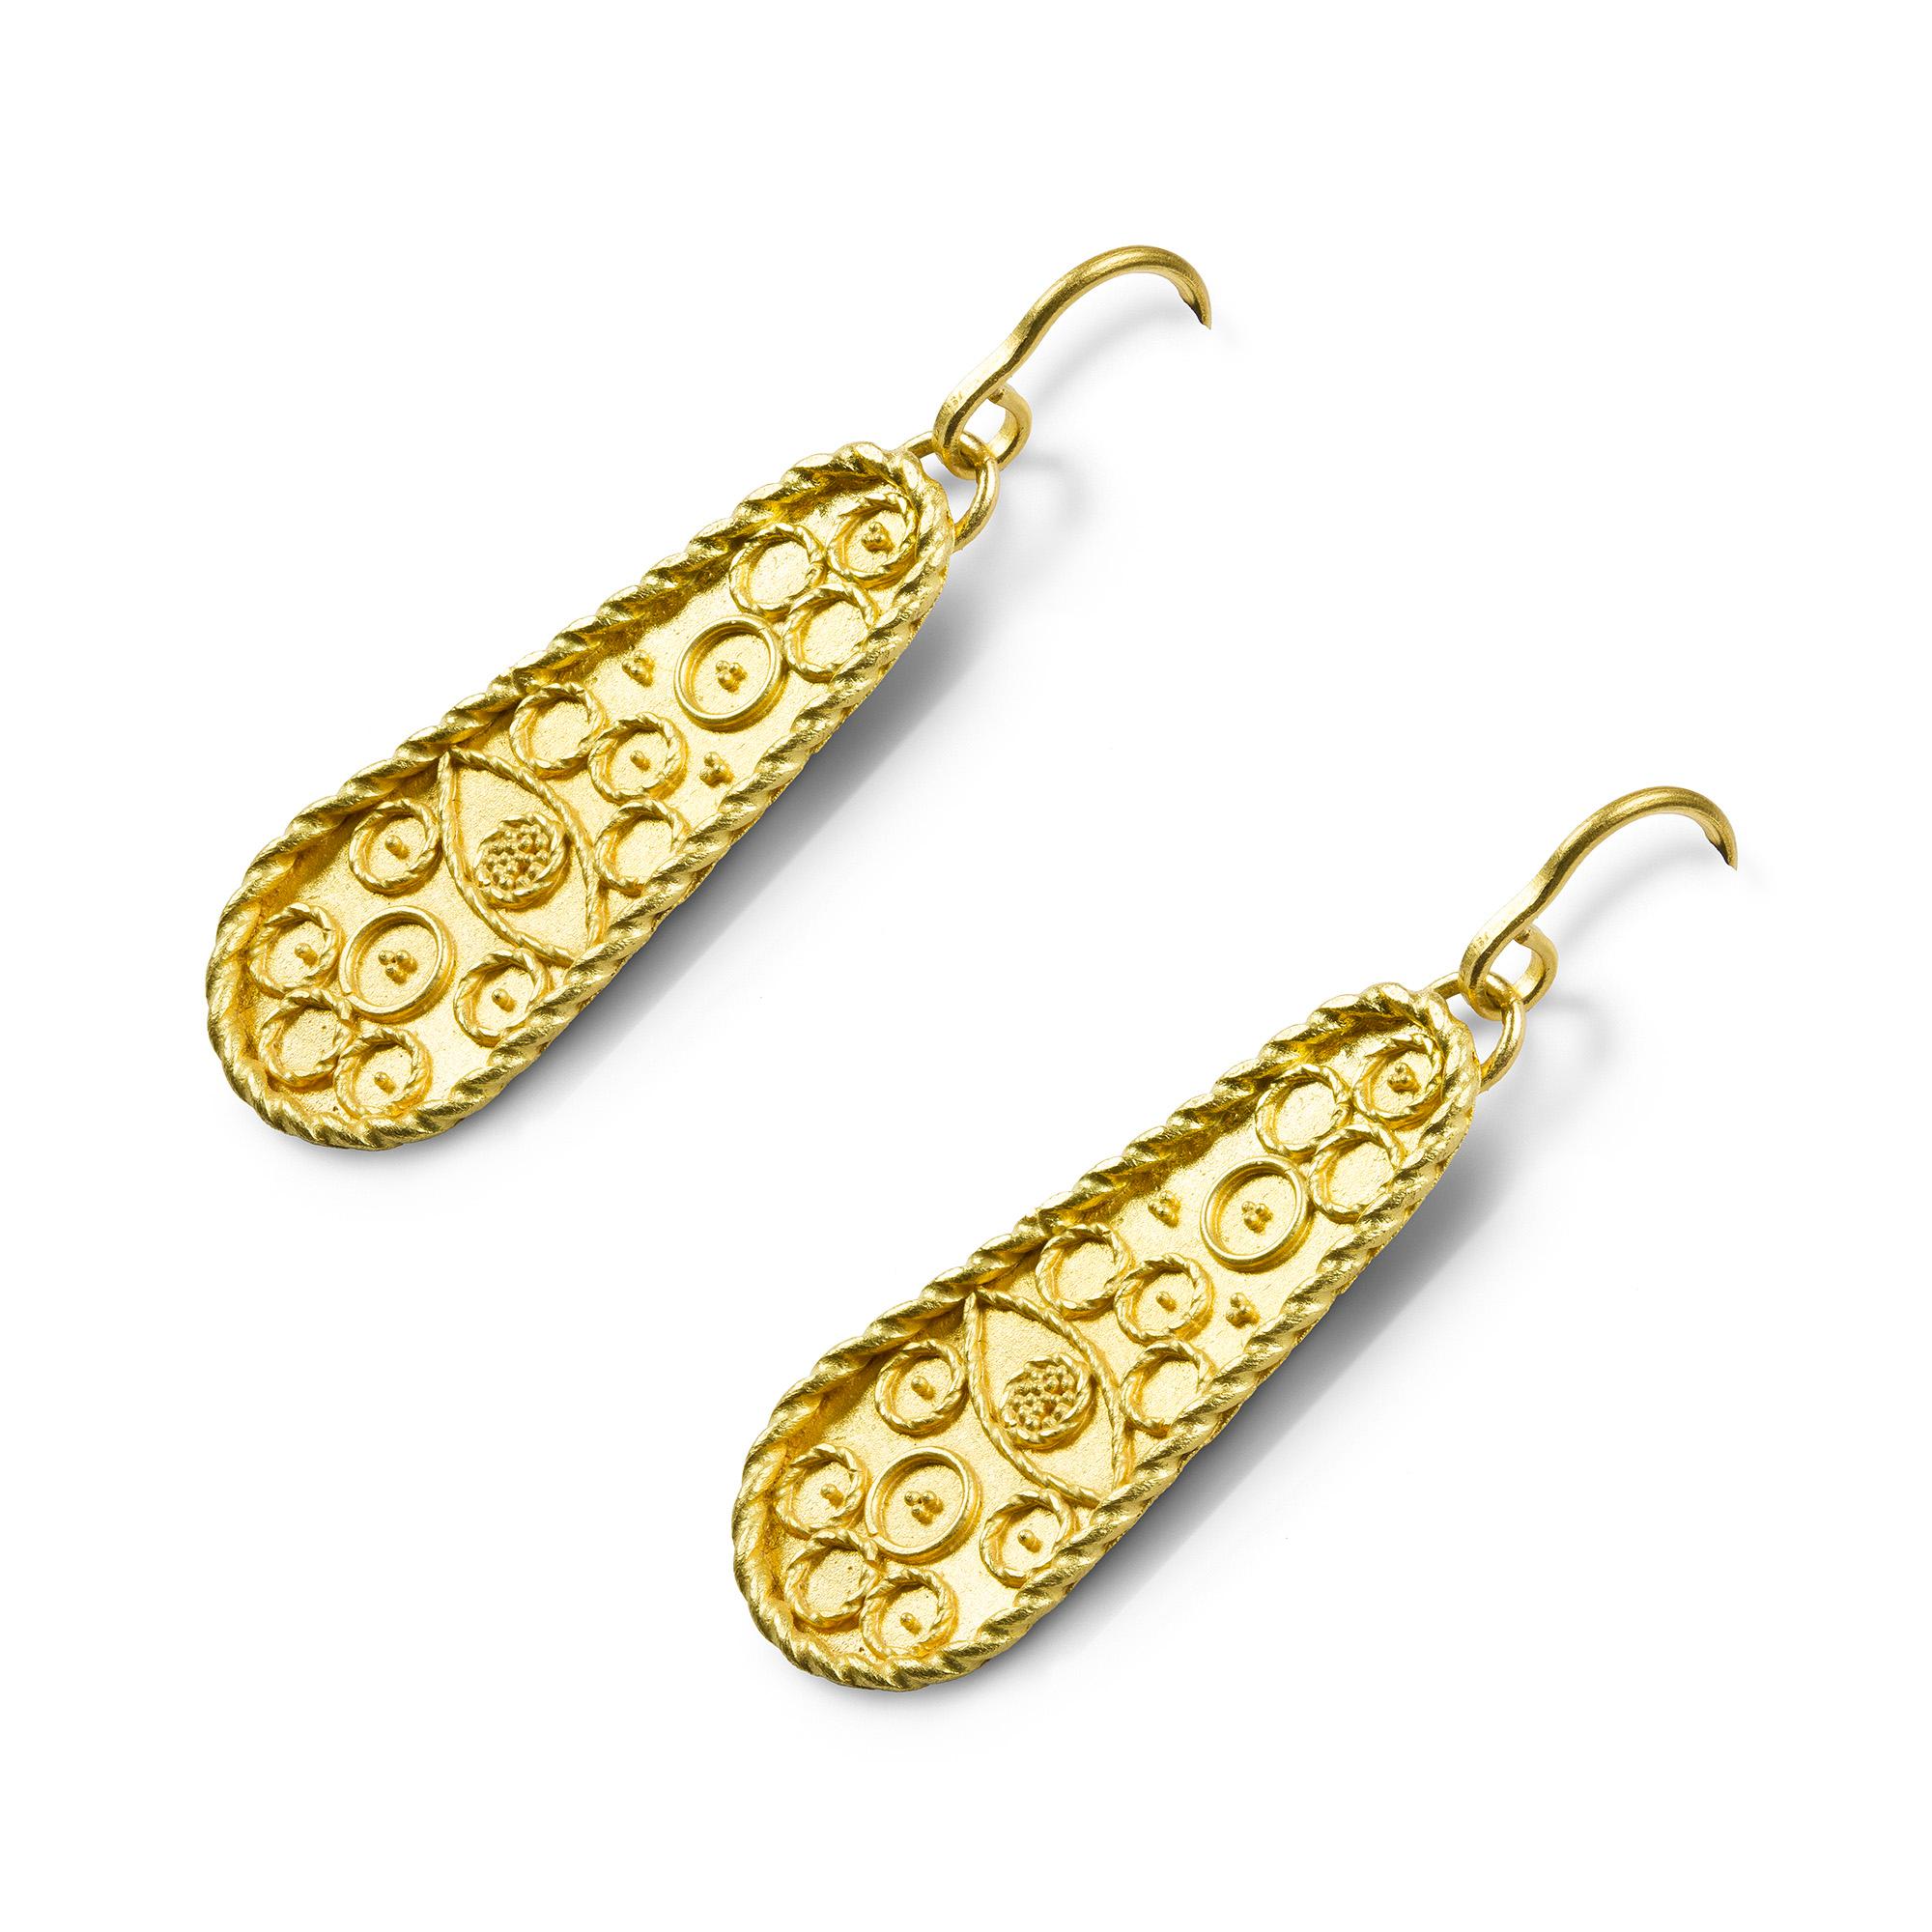 A pair of gold plaque earrings by Akelo, each elongated pear-shaped gold plaque, with twisted wire work border, decorated with an eye motif and circle design rendered using filigree and gold granulation, and embellished with granulation clusters, to